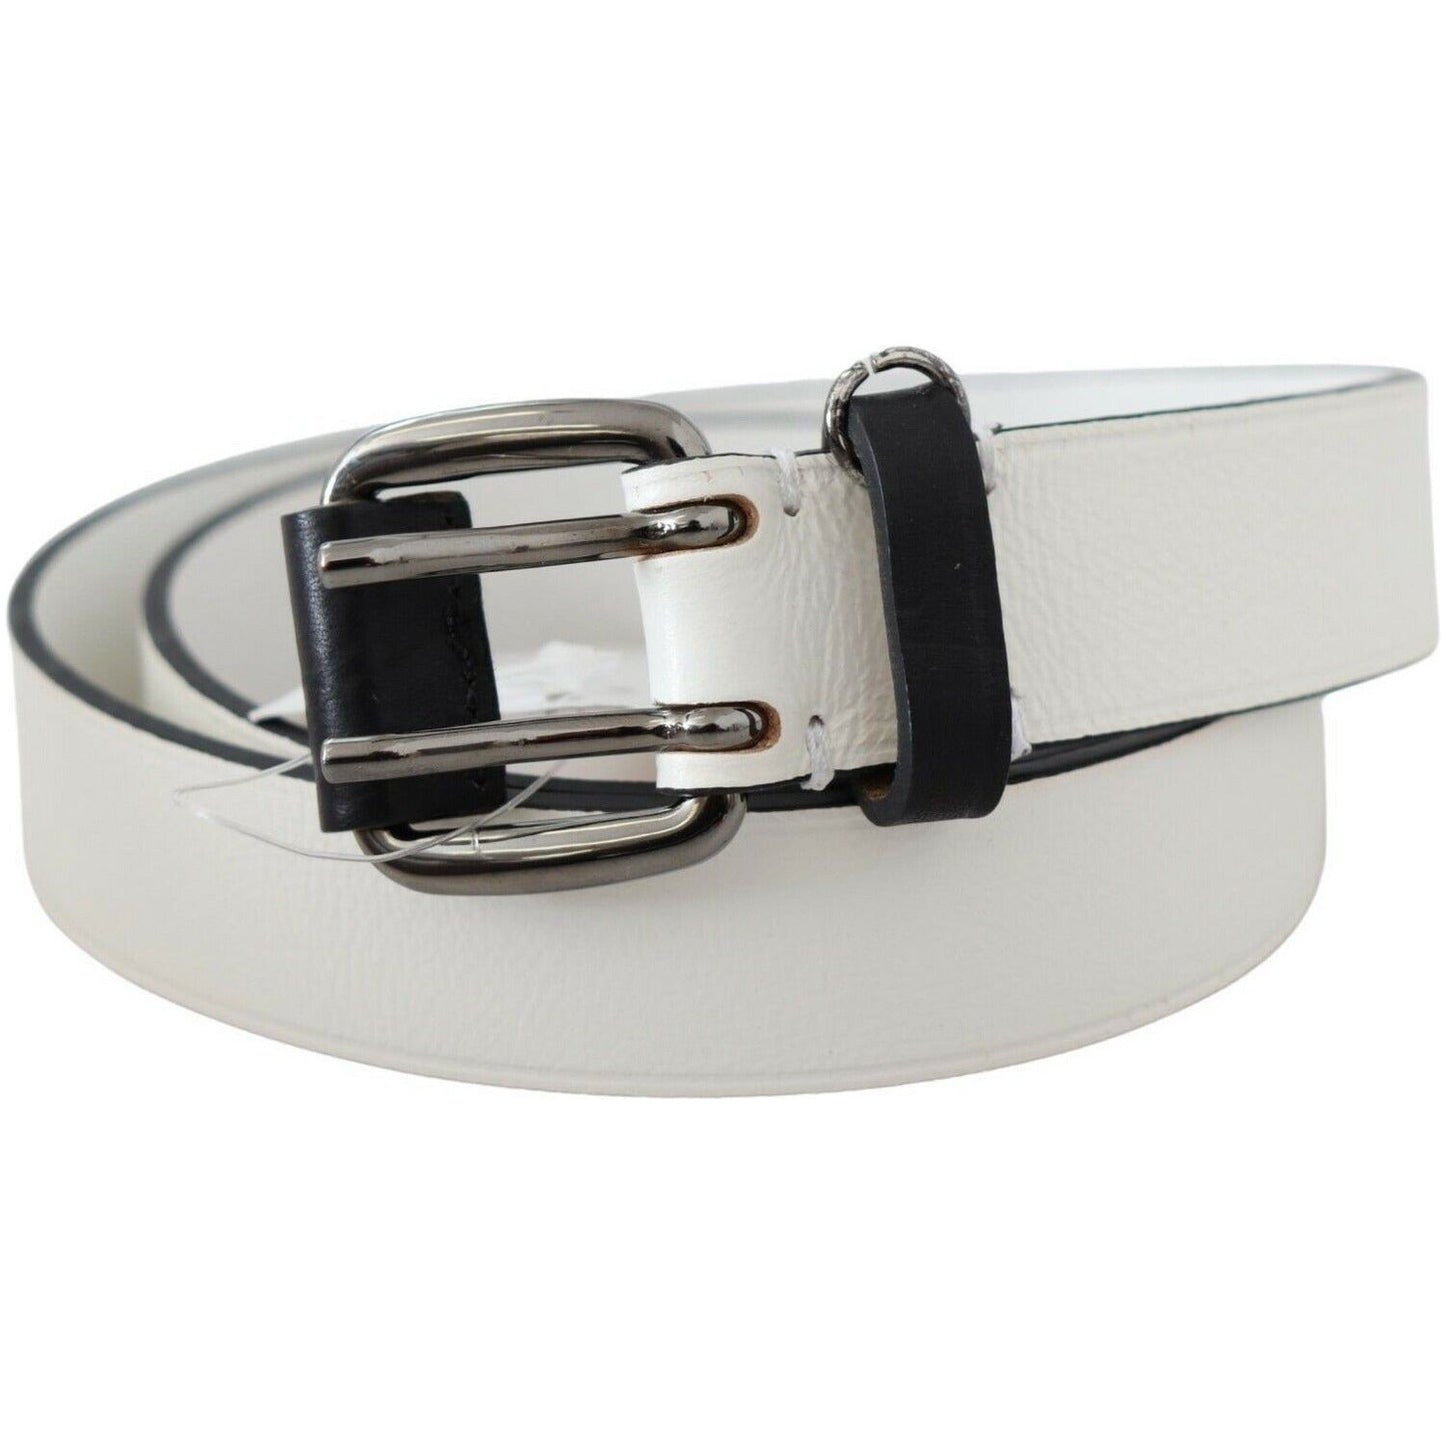 Costume National Chic White Leather Fashion Belt WOMAN BELTS white-genuine-leather-silver-buckle-waist-belt s-l1600-89-113e1756-76a.jpg